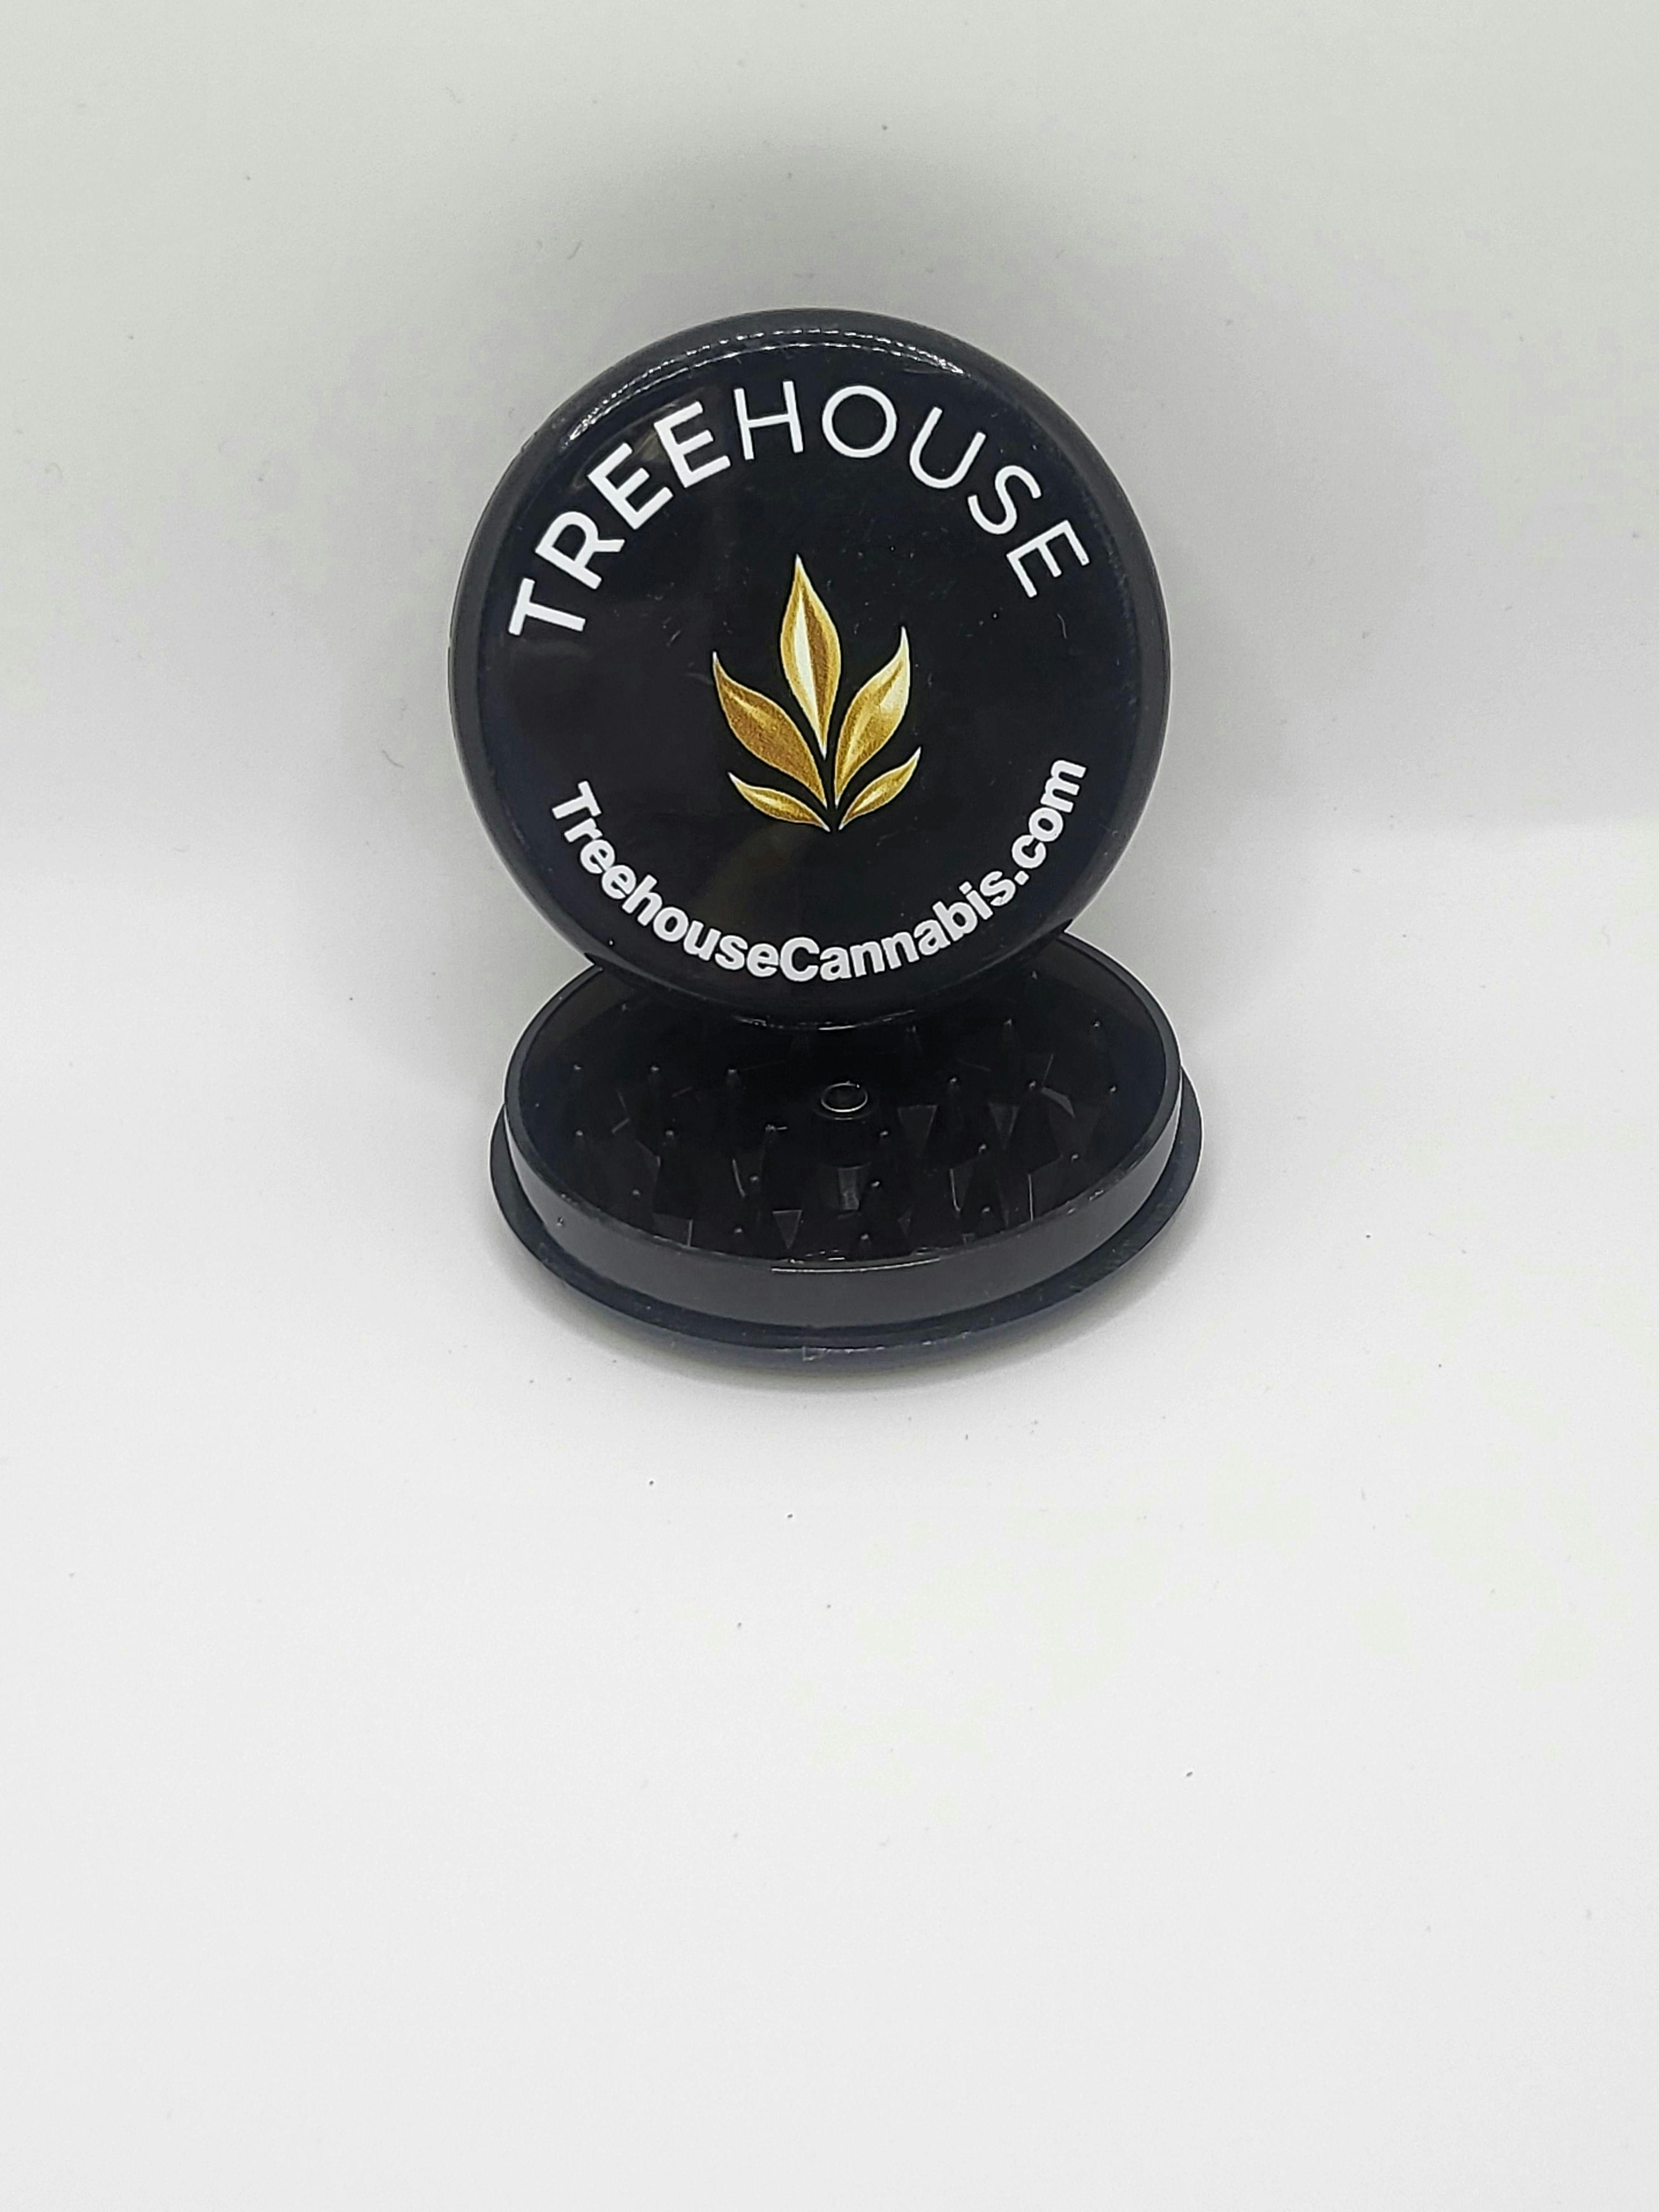 Treehouse Plastic Grinder - Treehouse Cannabis - ACCESSORIES - Rockland County Weed Delivery | Treehouse Cannabis